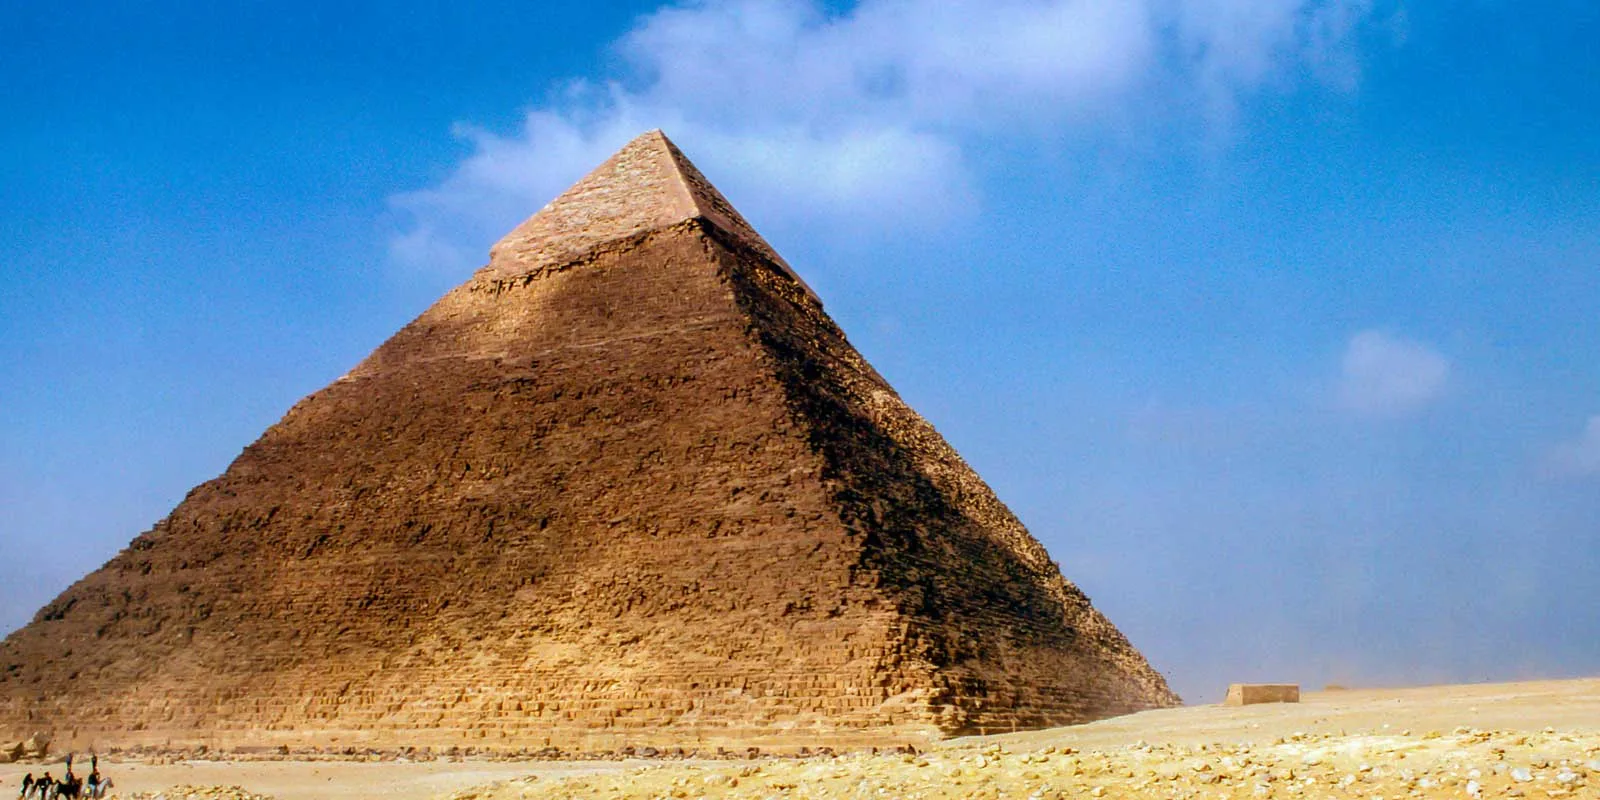 Great Pyramid in Egypt against a bright blue sky.